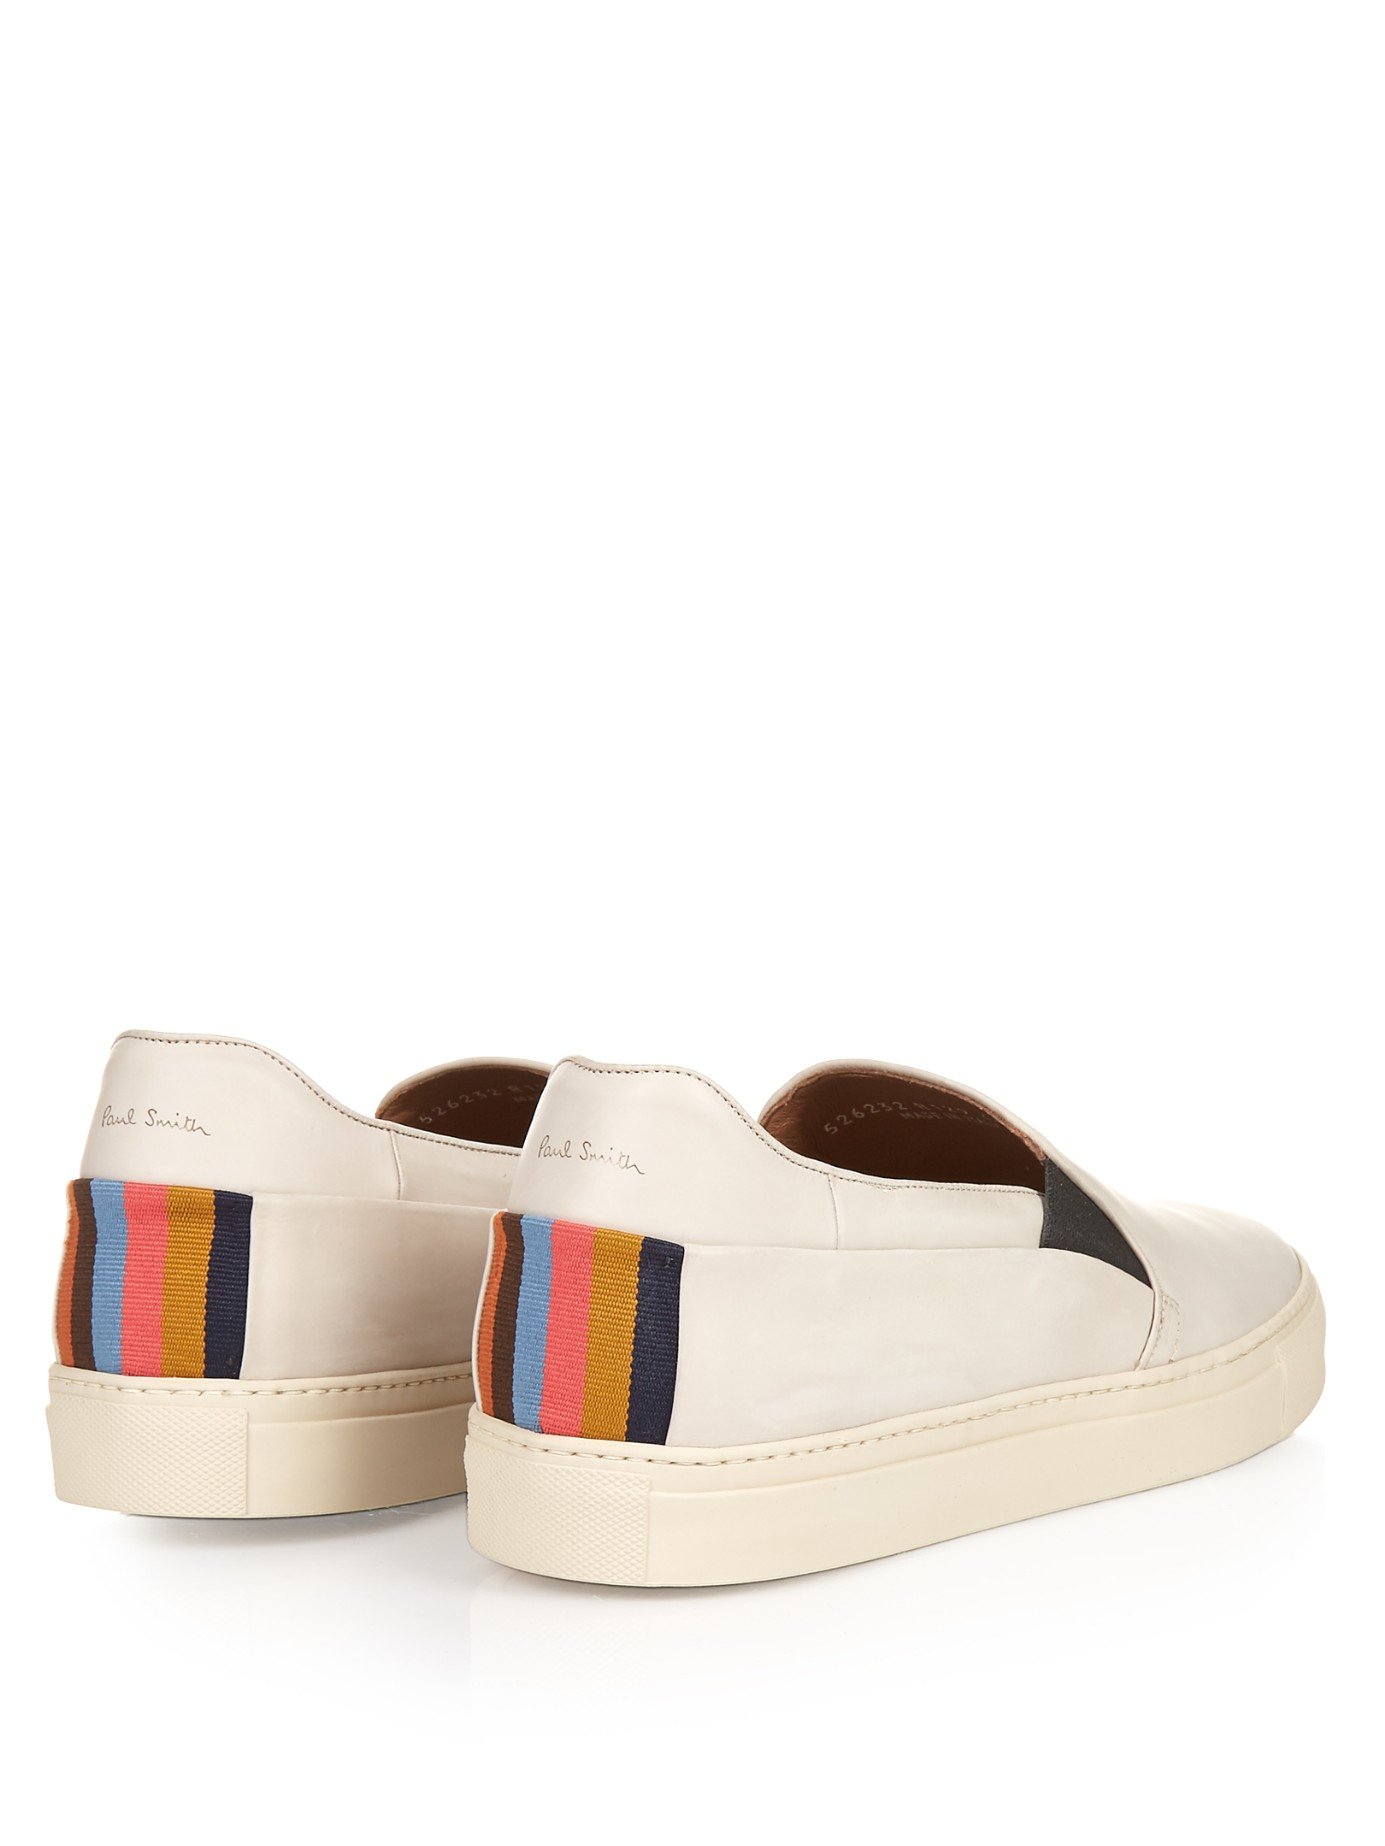 paul smith slip on trainers cheap online